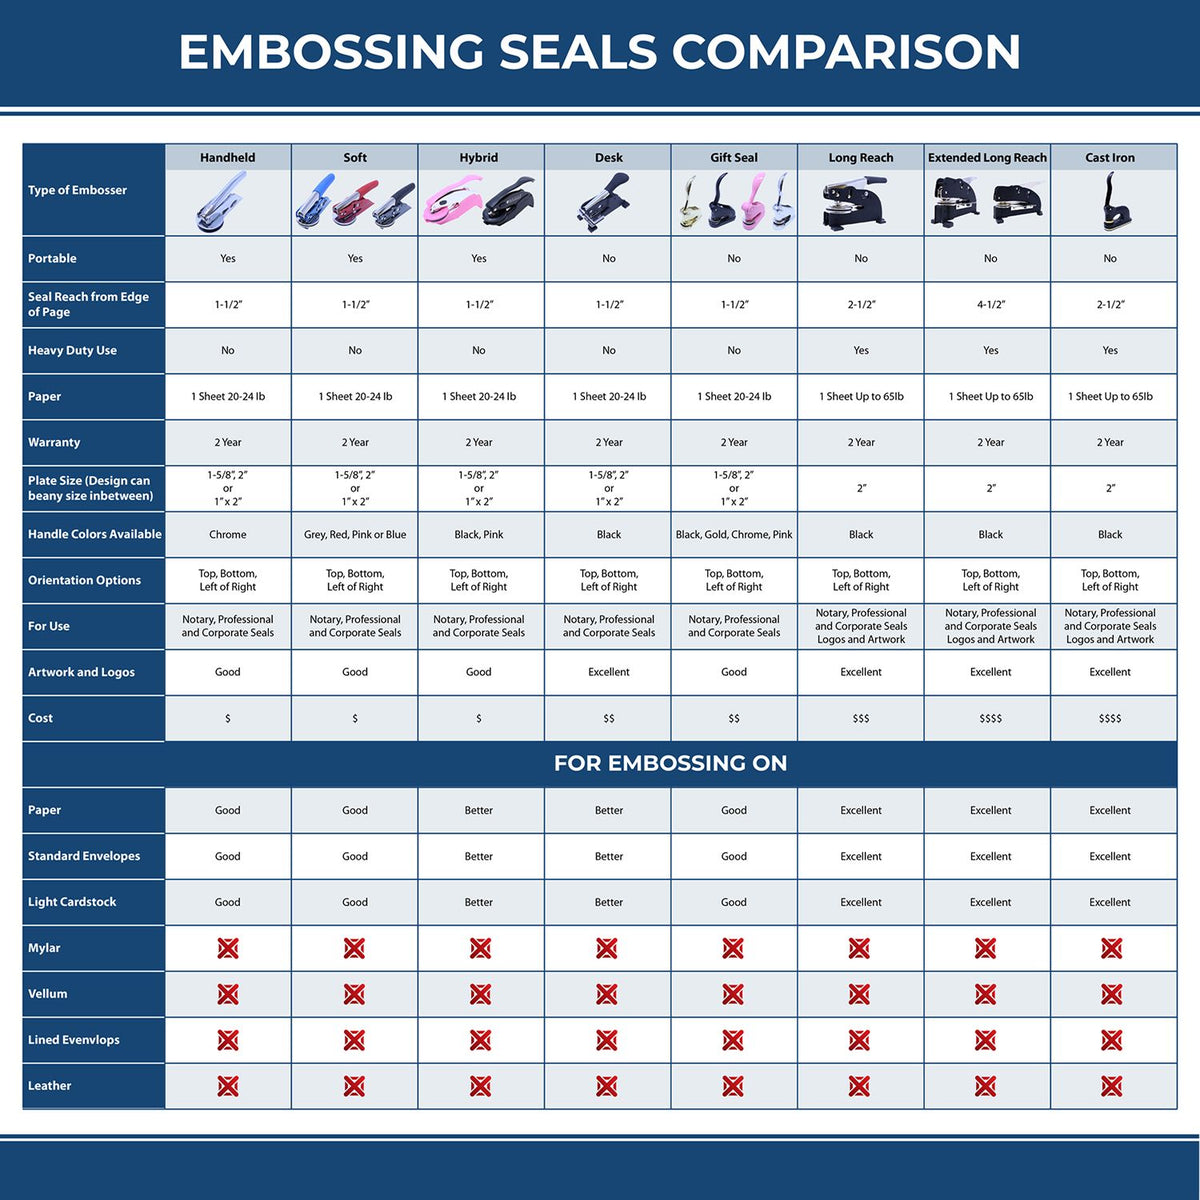 A comparison chart for the different types of mount models available for the Hybrid South Dakota Geologist Seal